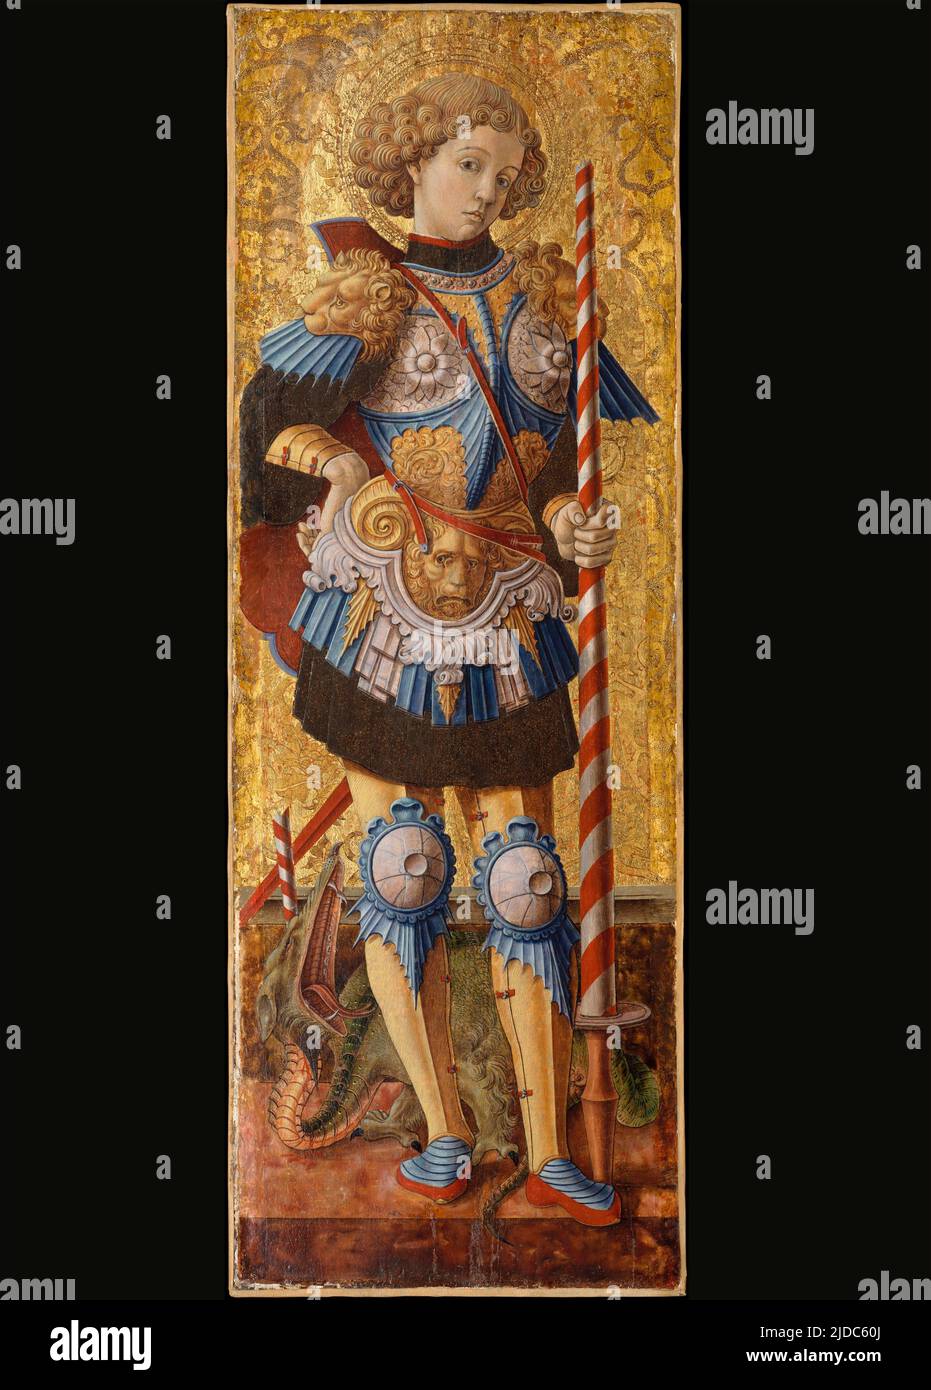 Saint George IV century -  by Carlo Crivelli in 1472 Stock Photo